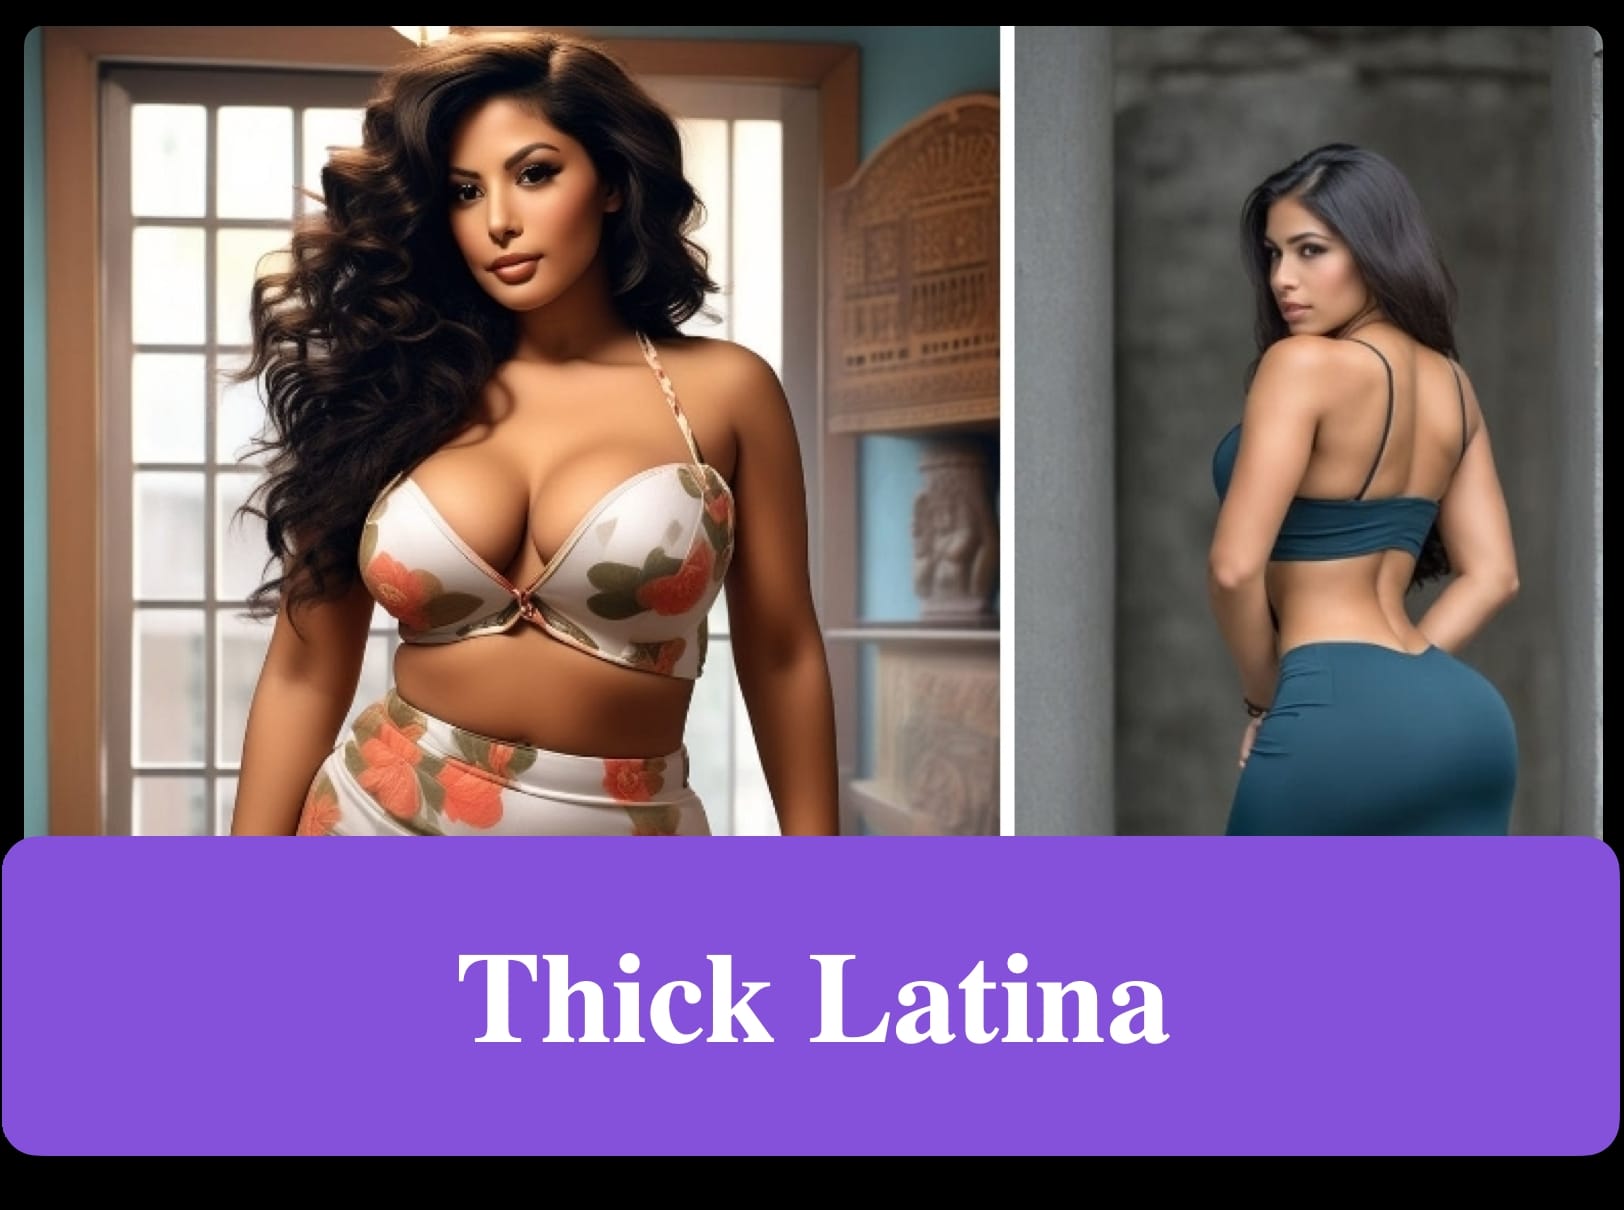 The Rise of Thick Latina Content on TikTok